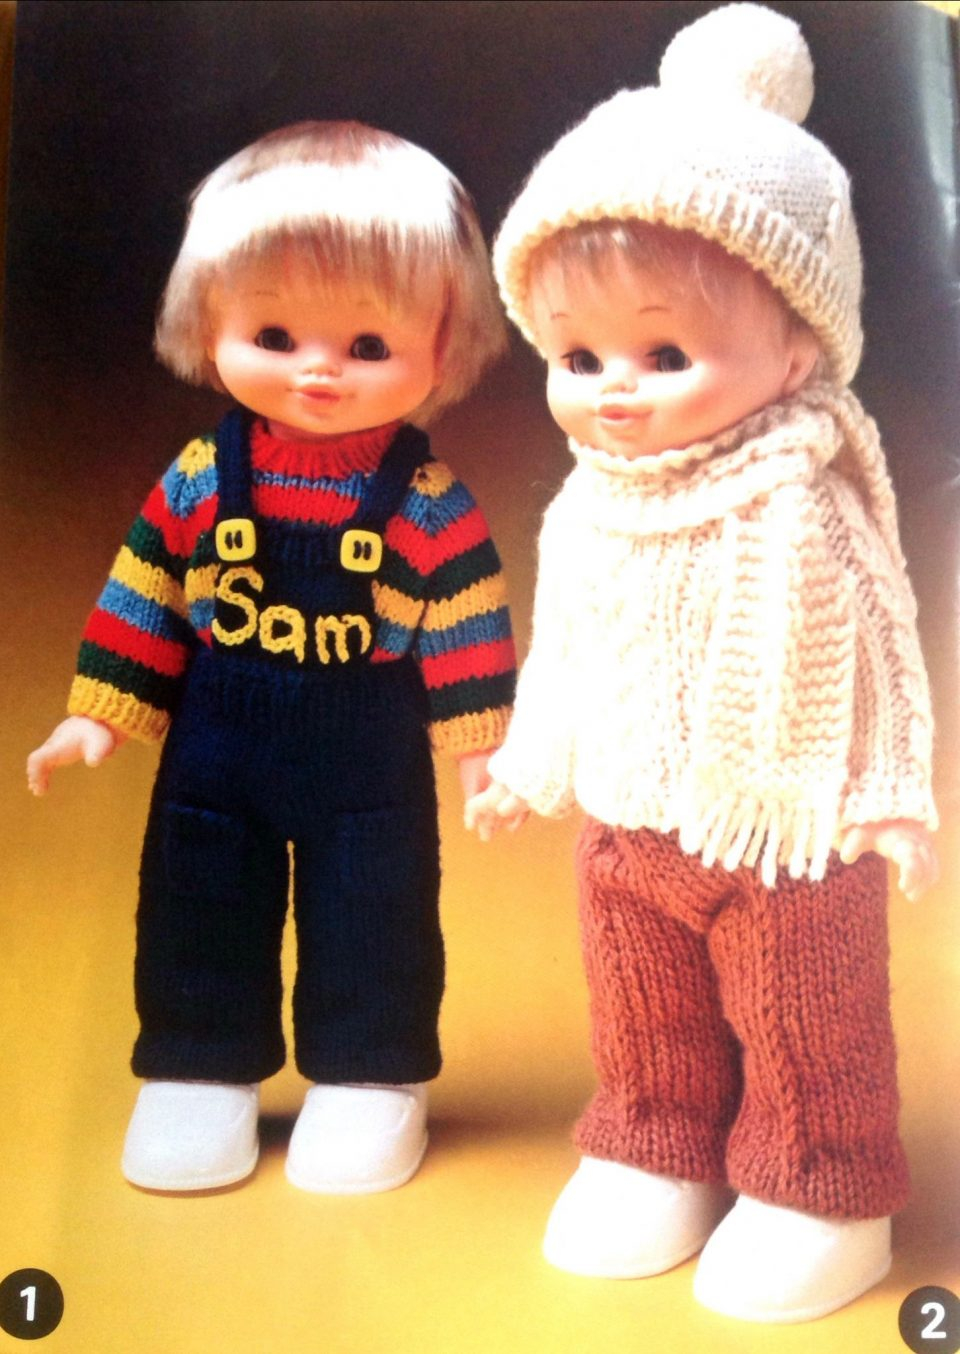 Knitting Patterns For Baby Dolls Clothes Digital Vintage Knitting Pattern Dolls Clothes Sets Patterns Free